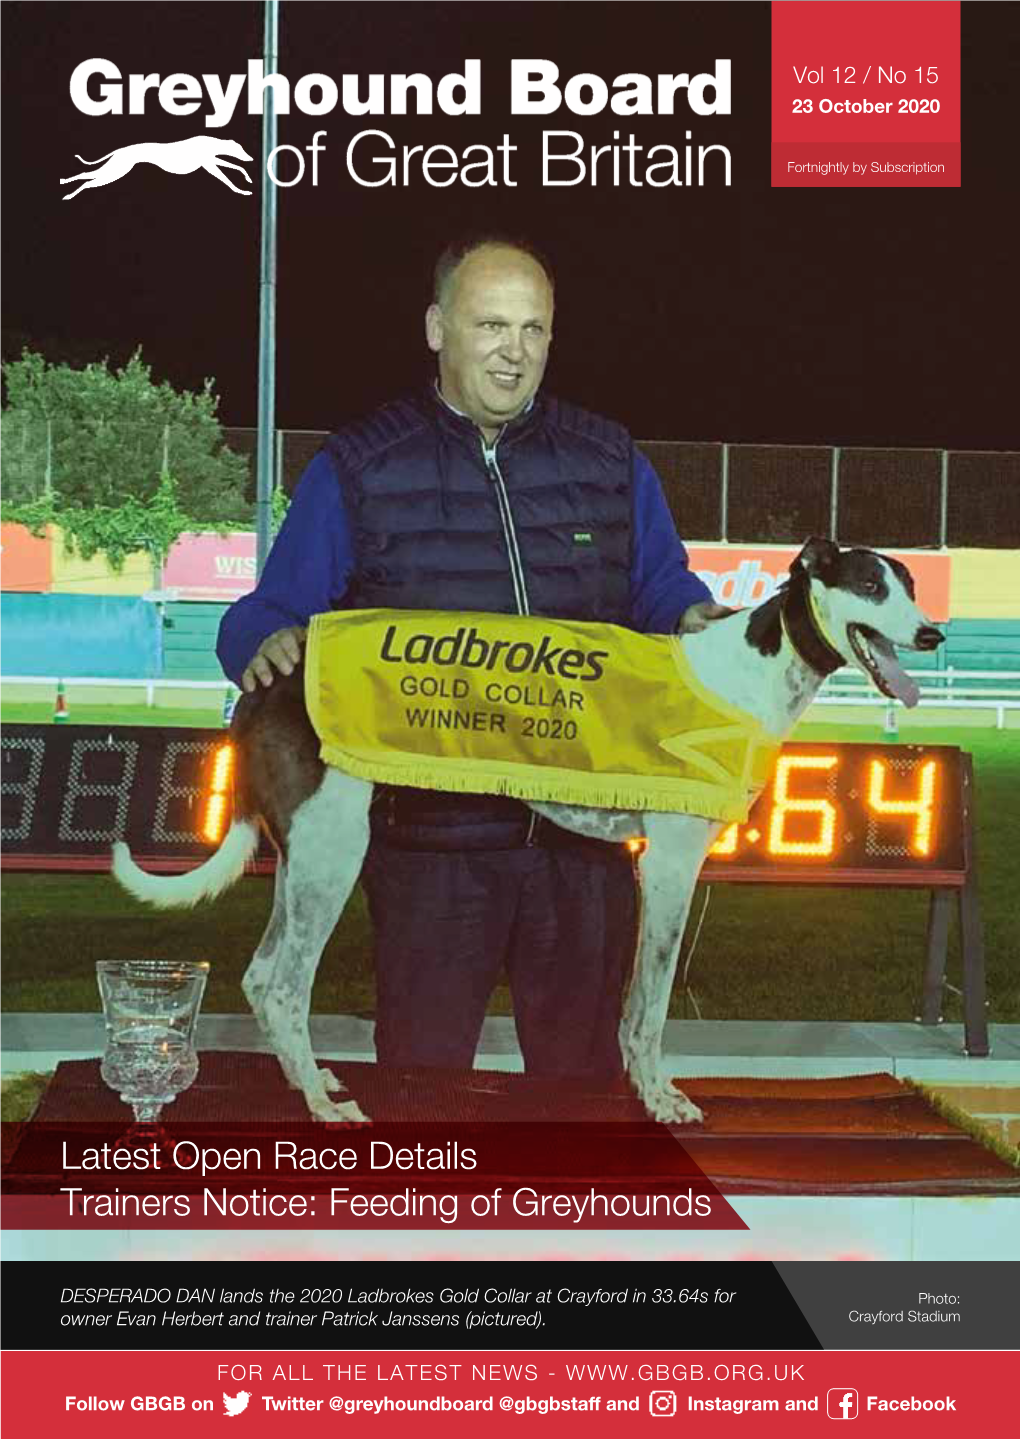 Latest Open Race Details Trainers Notice: Feeding of Greyhounds